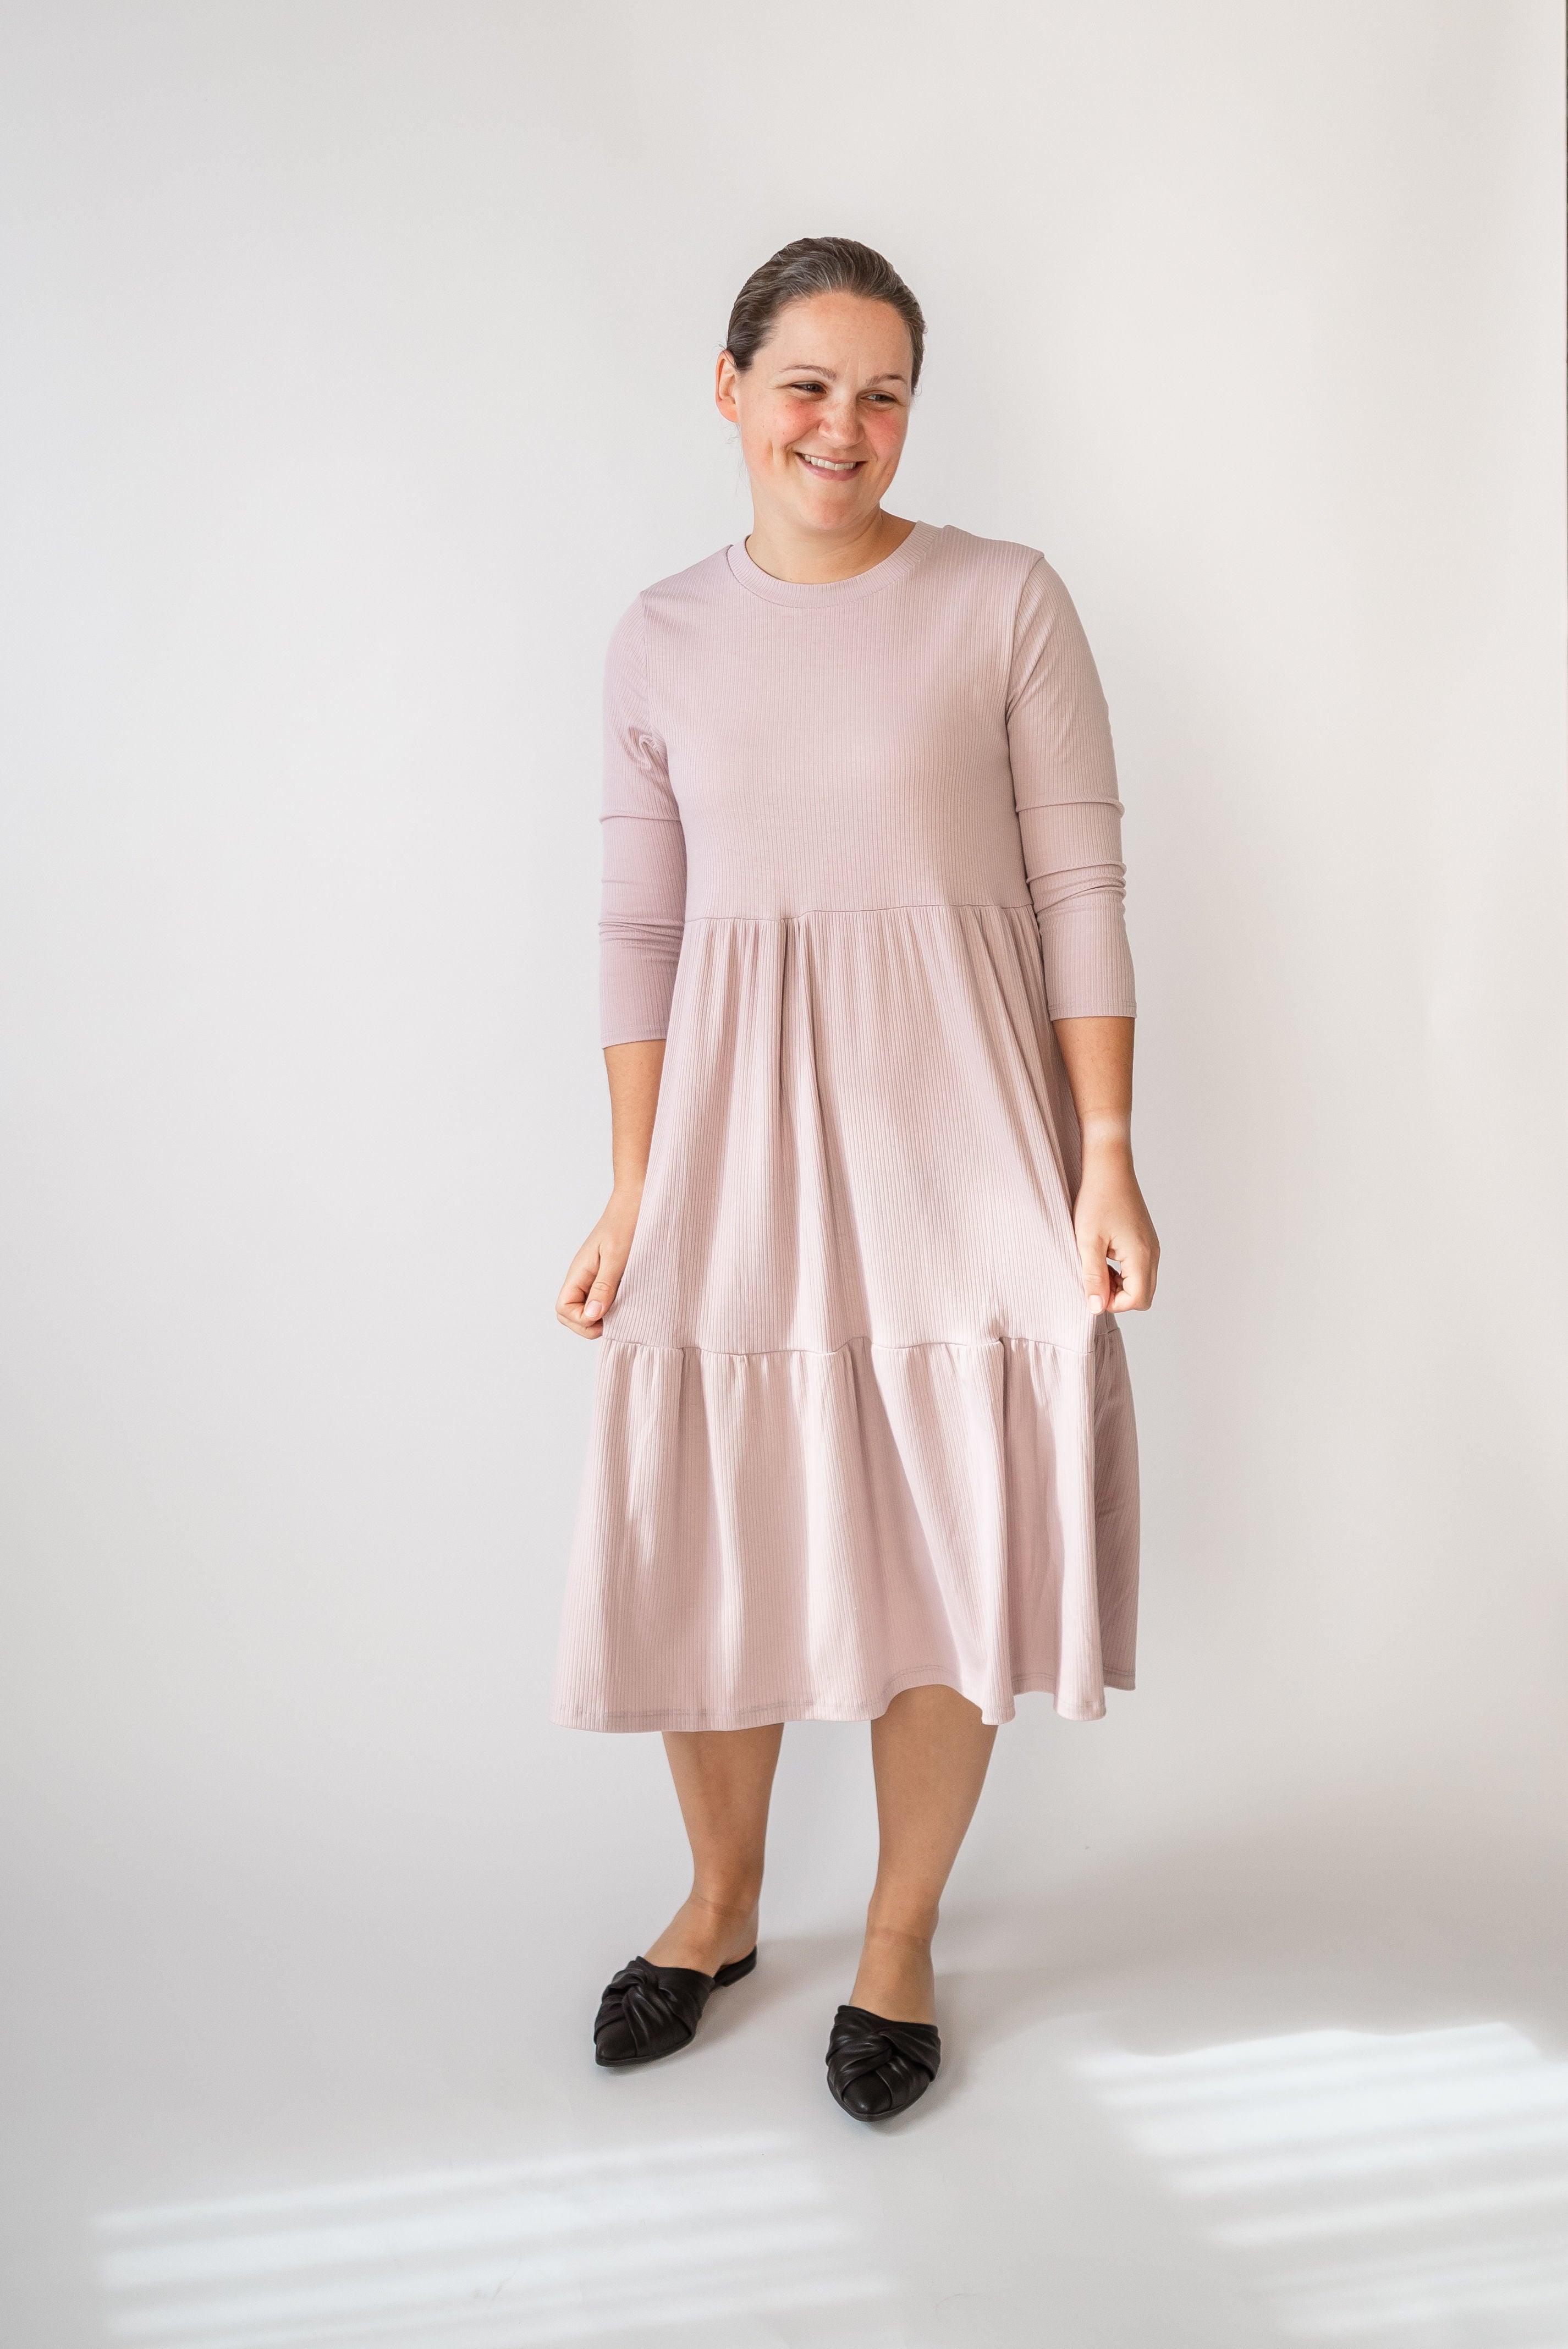 Lacy Ribbed Midi Dress in Dusty Lavender - Lacy Ribbed Midi Dress in Dusty Lavender - undefined - Salt and Honey